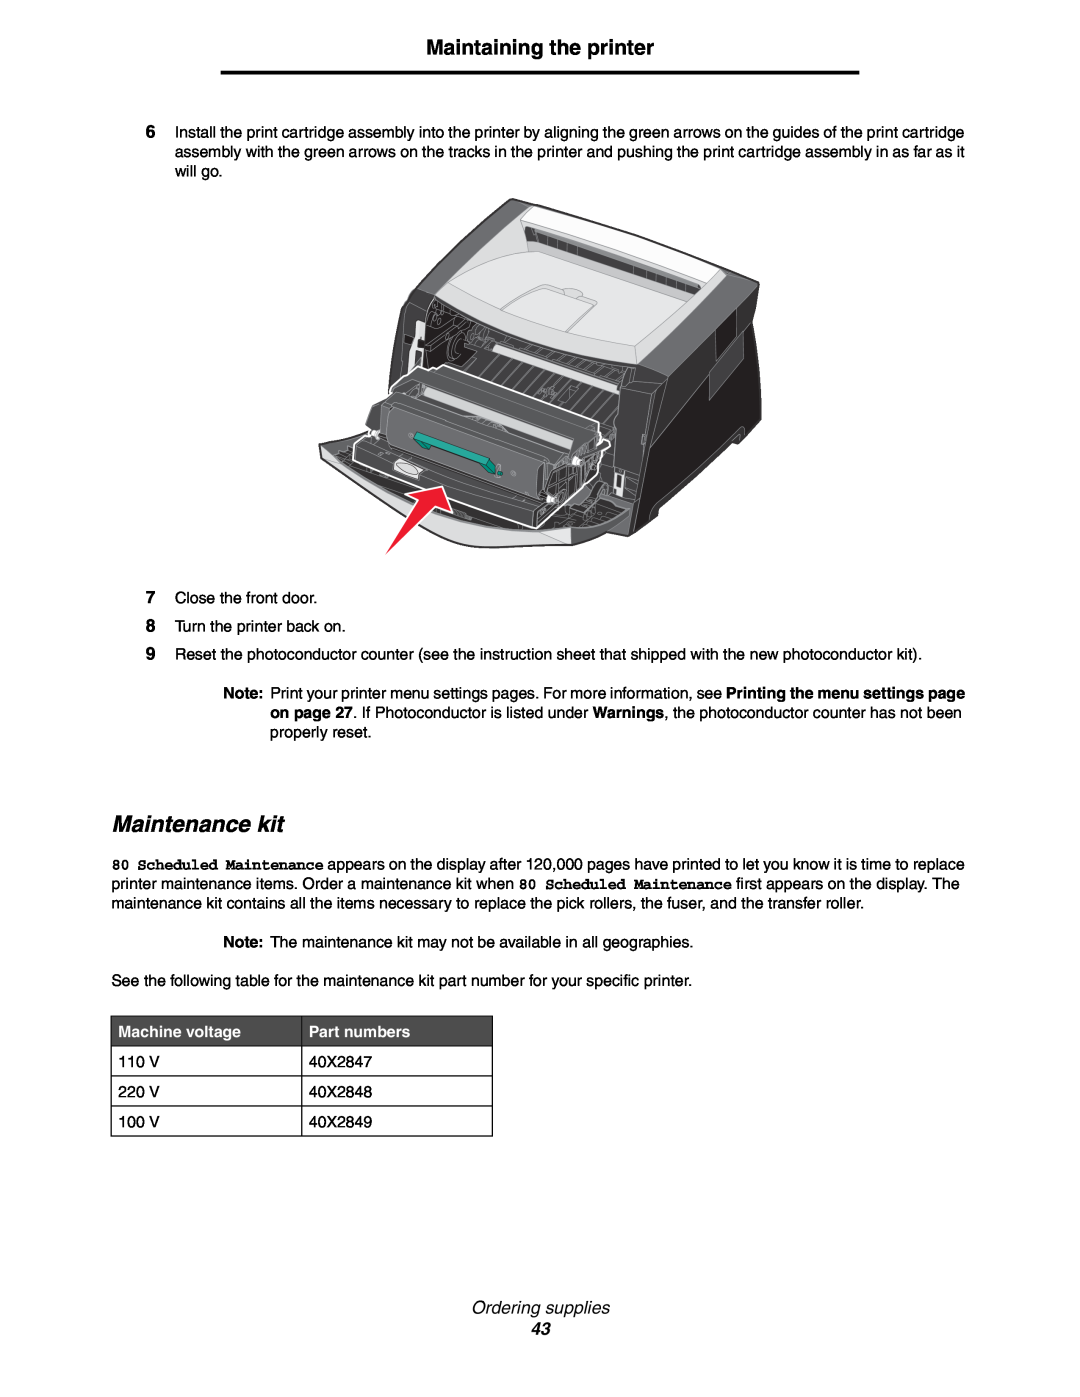 Lexmark 450dn manual Maintenance kit, Maintaining the printer, Ordering supplies, Machine voltage, Part numbers 